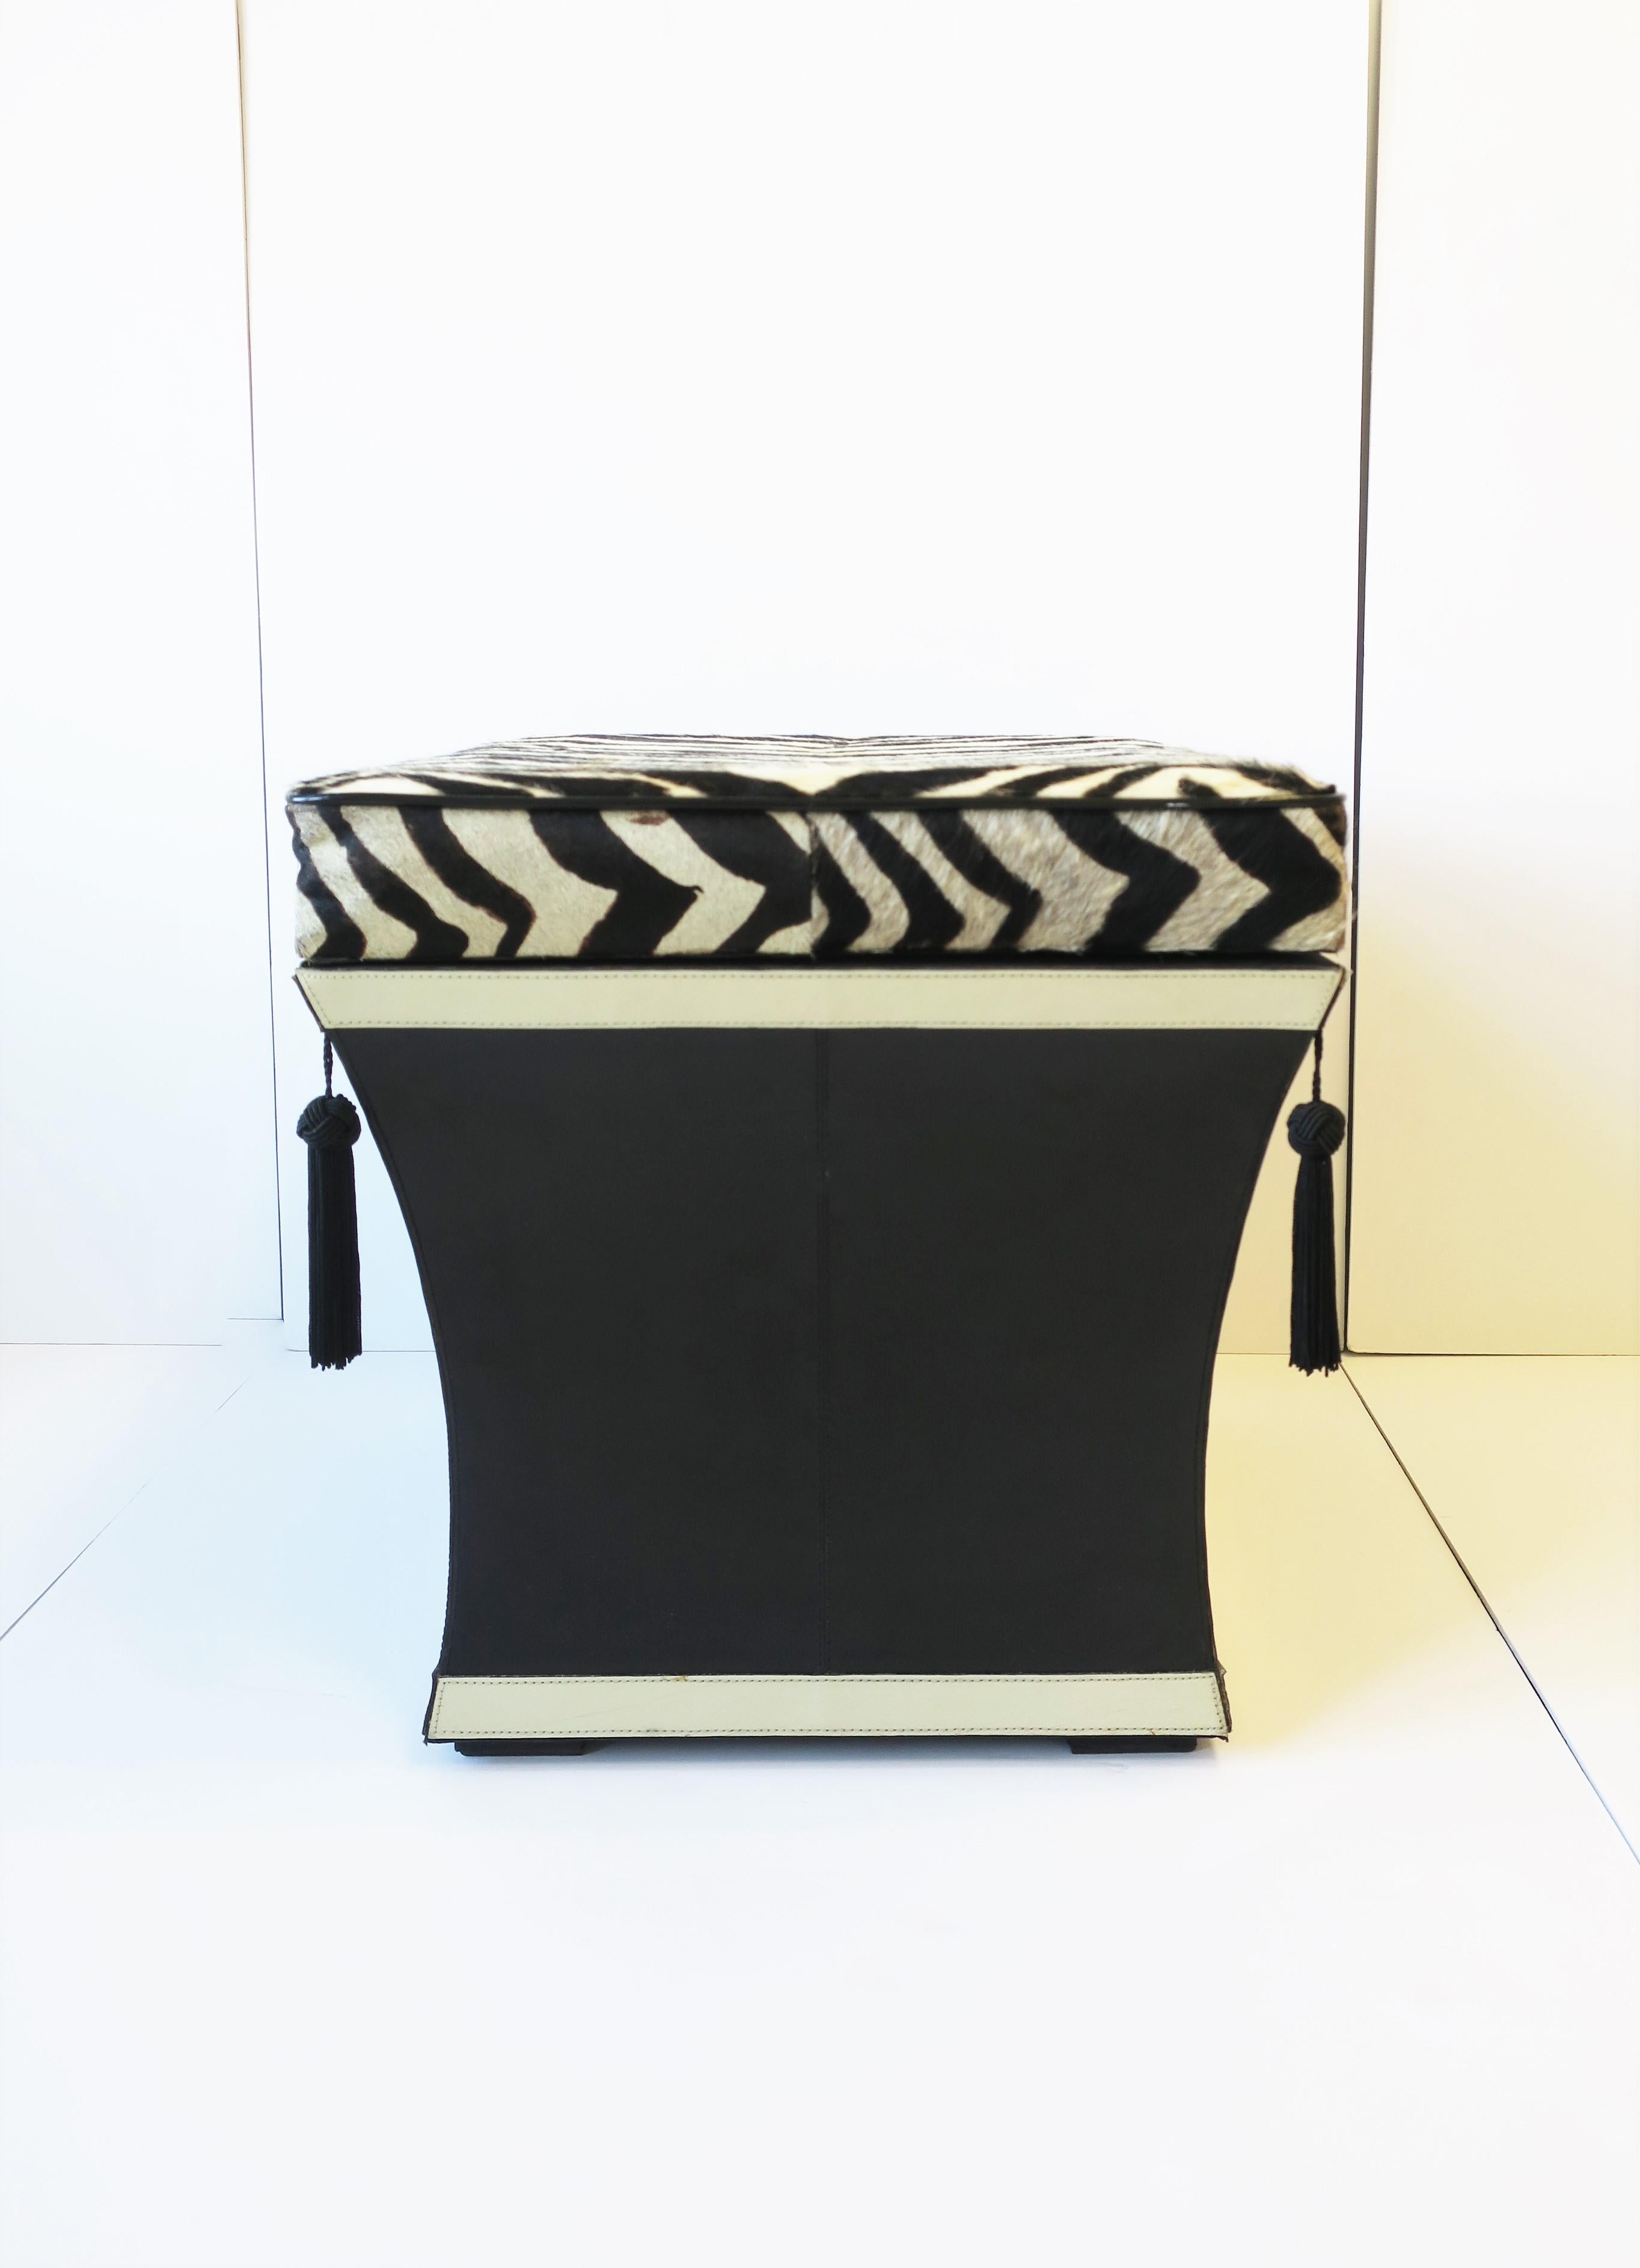 Animal Skin Zebra Hide Bench Stool with Storage Trunk and Tassels, circa 1980s 1990s For Sale